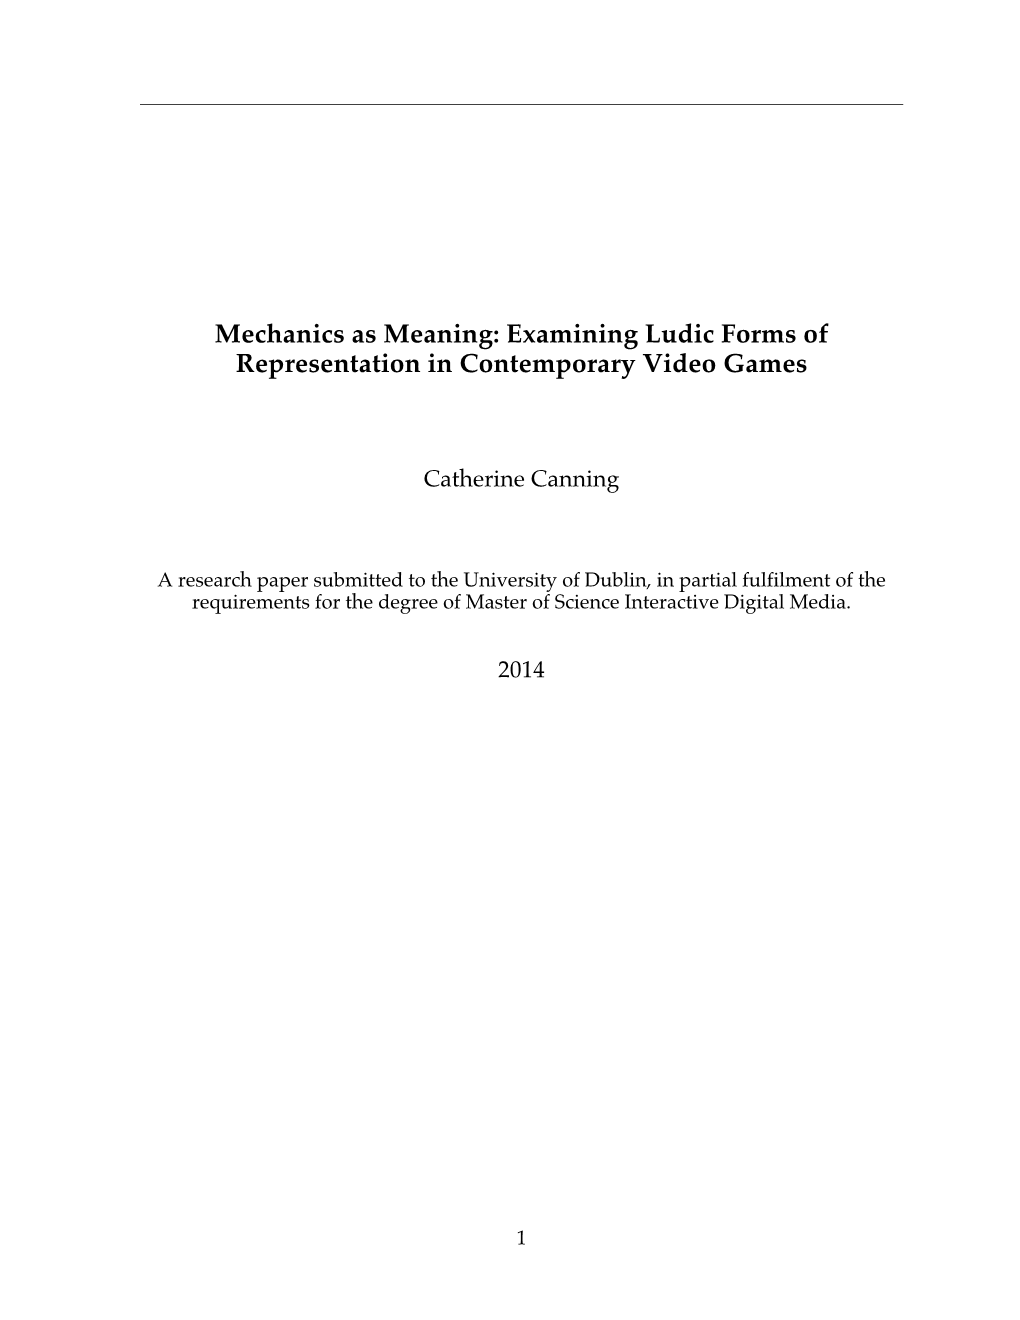 Mechanics As Meaning: Examining Ludic Forms of Representation in Contemporary Video Games